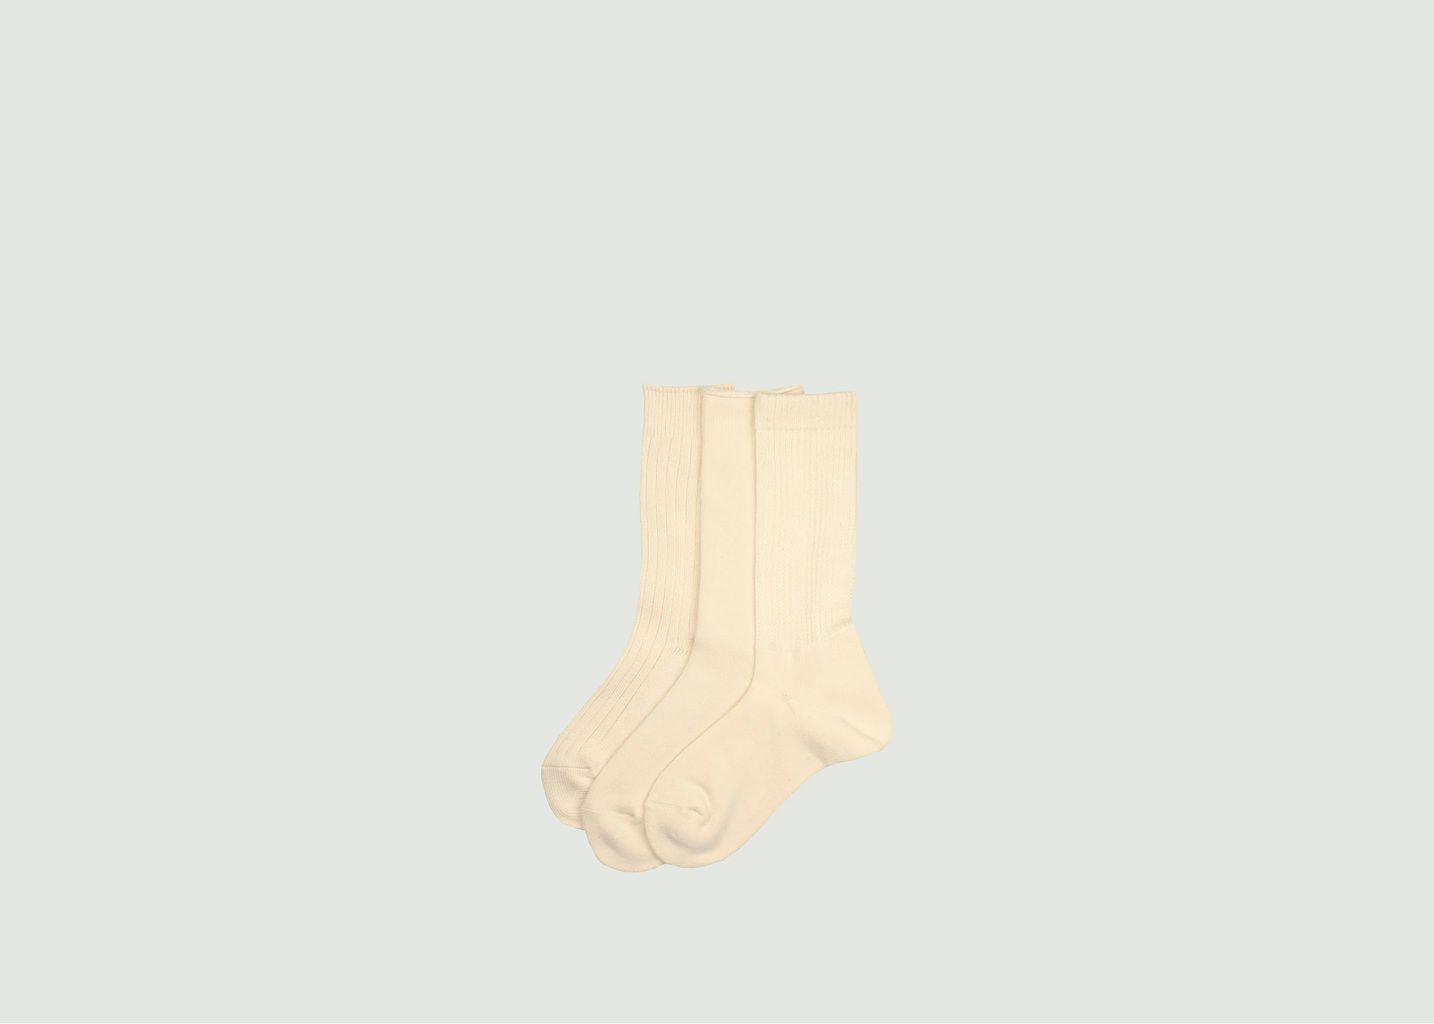 Pack of 3 pairs of socks R1427 - Rototo